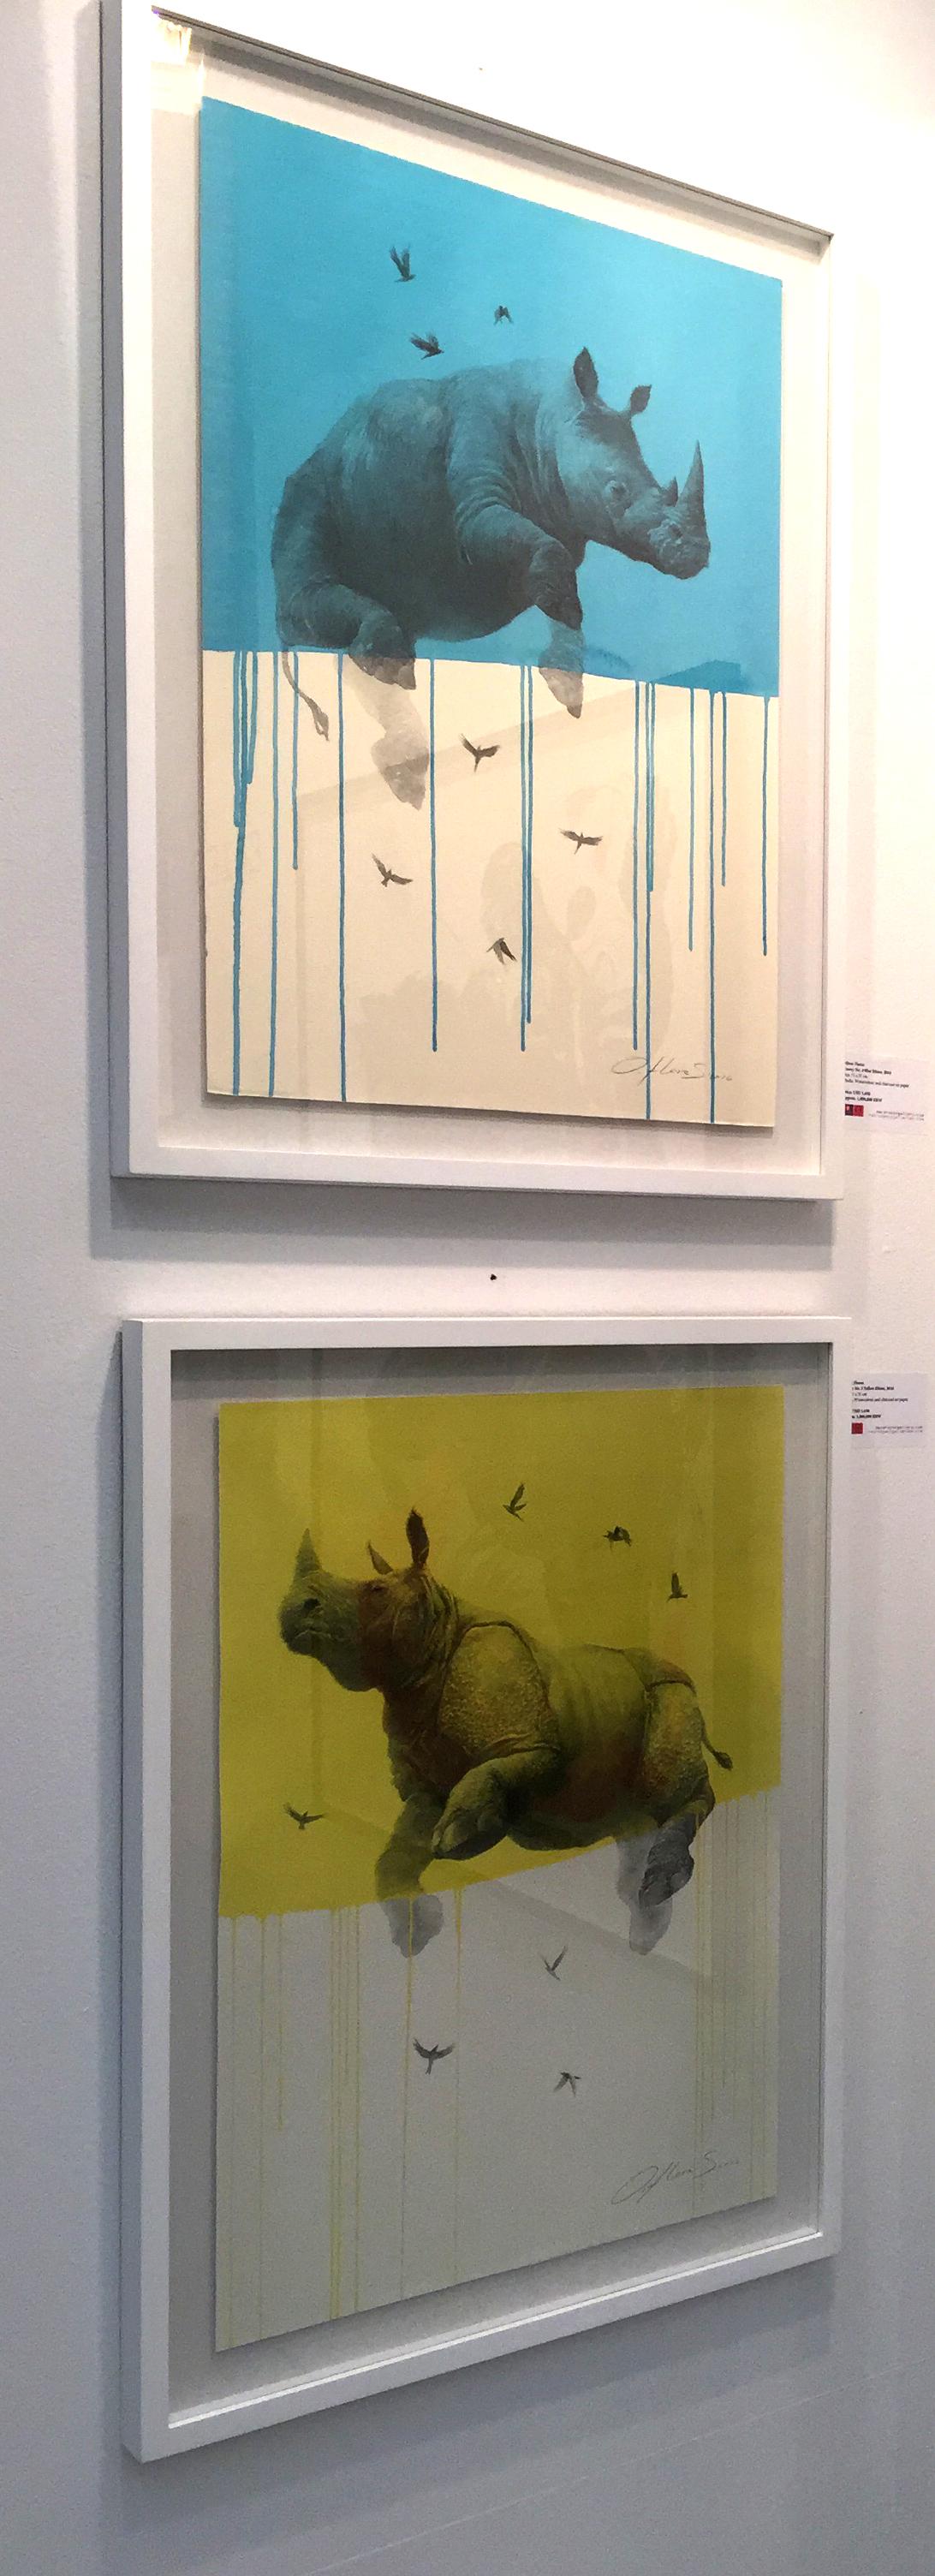 Jouney No. 6 Yellow Rhino, watercolor & charcoal of flying rhinoceros and birds - Painting by Oliver Flores